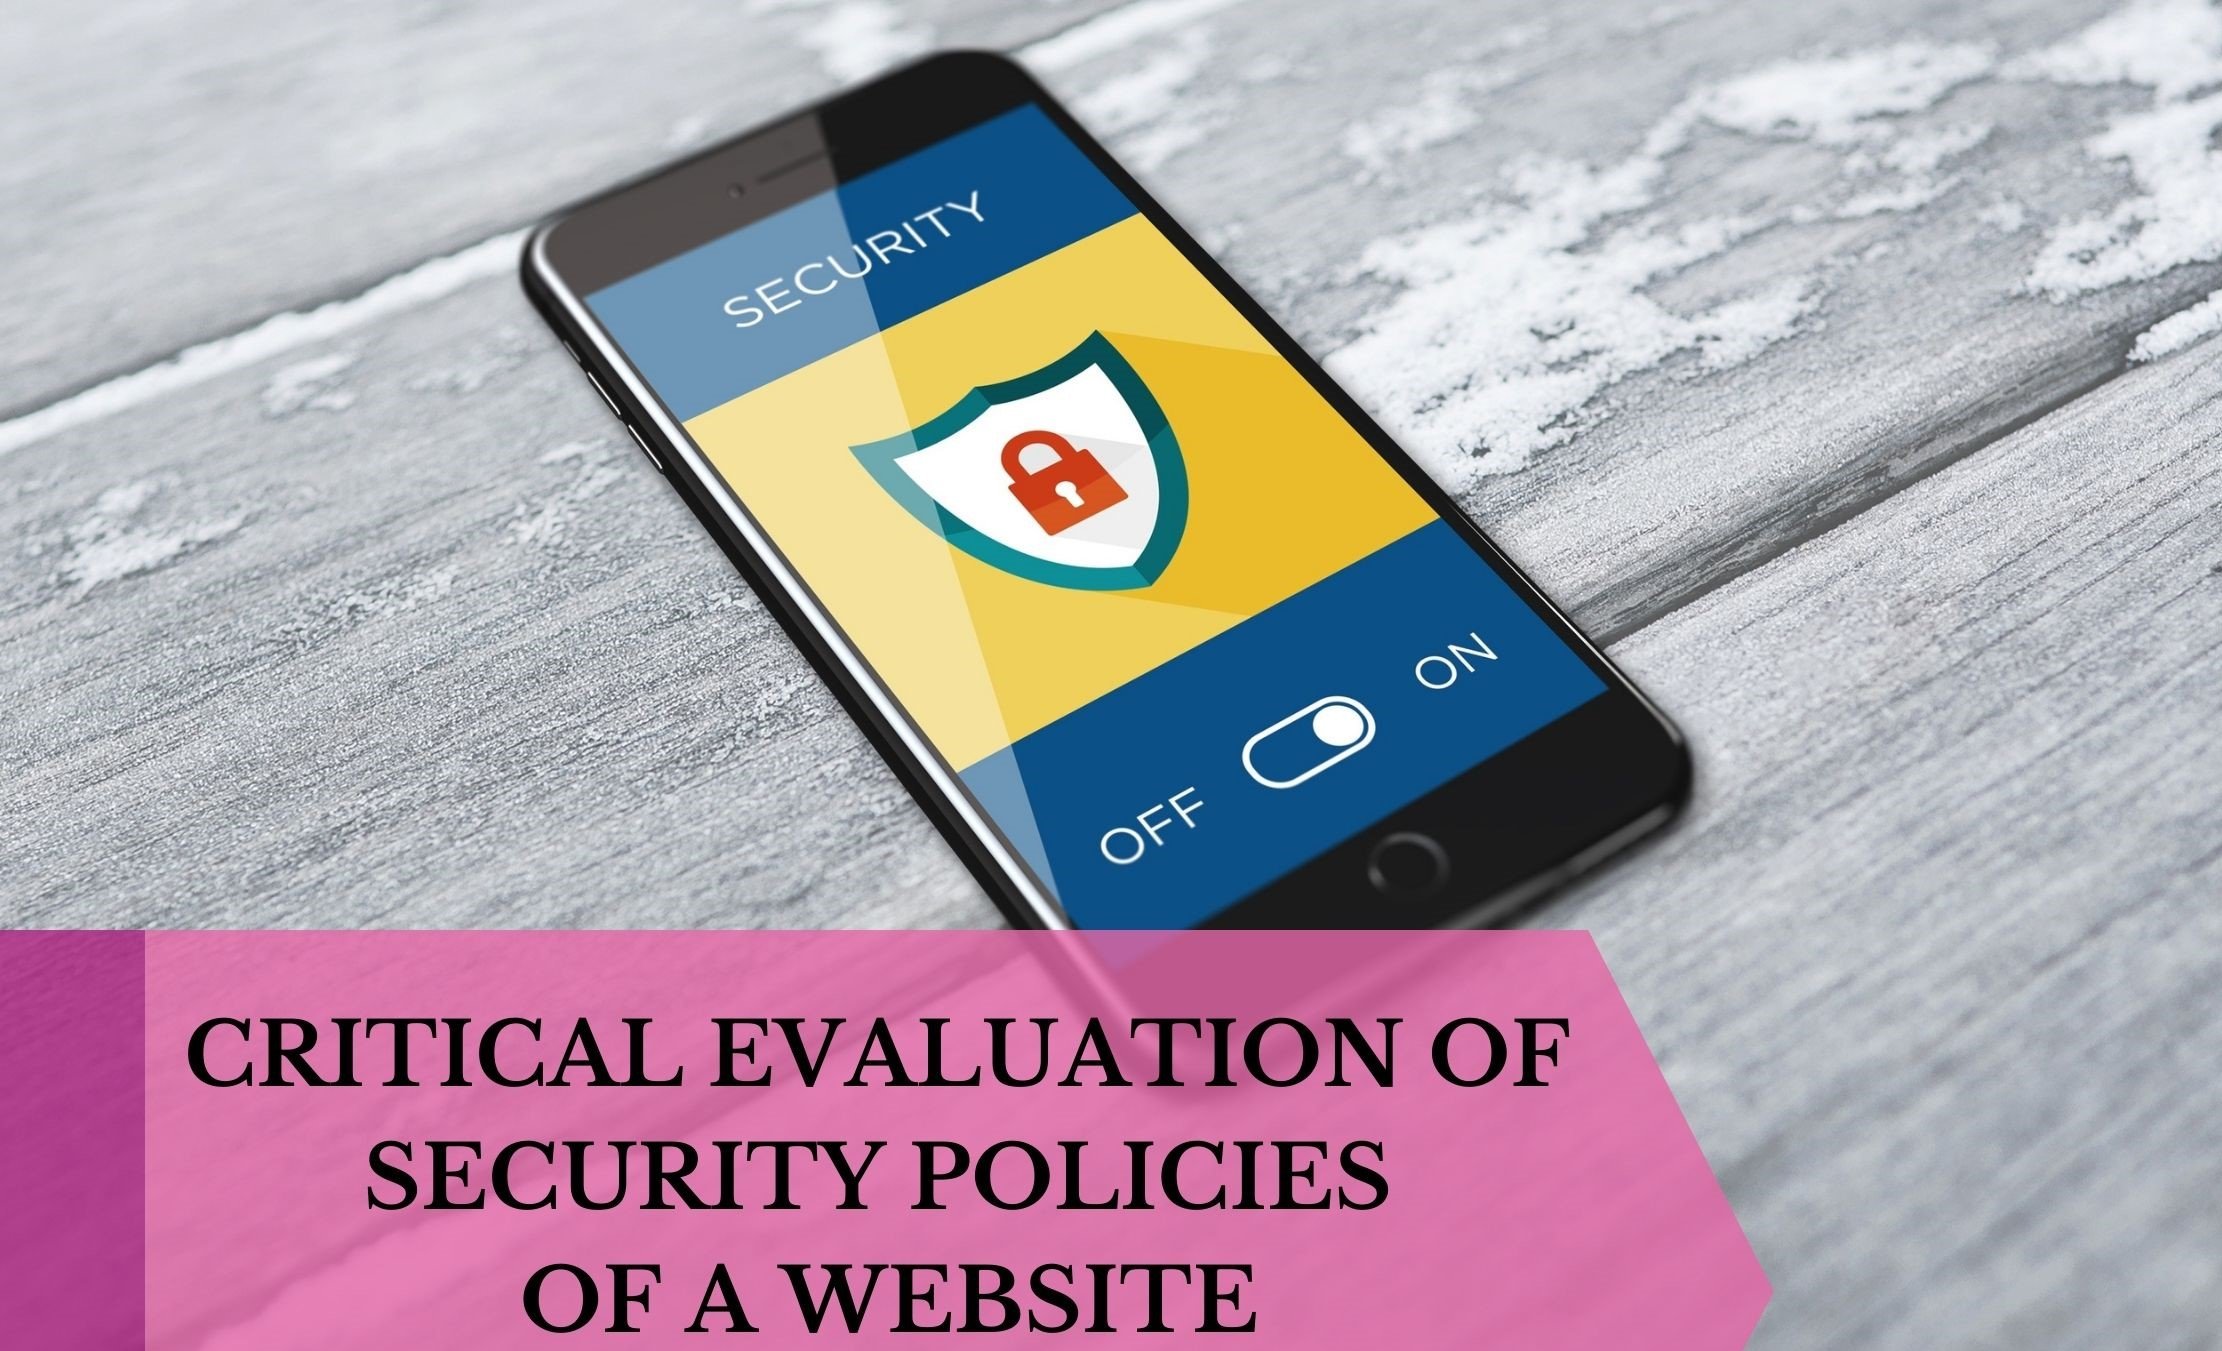 CRITICAL EVALUATION OF SECURITY POLICIES OF A WEBSITE